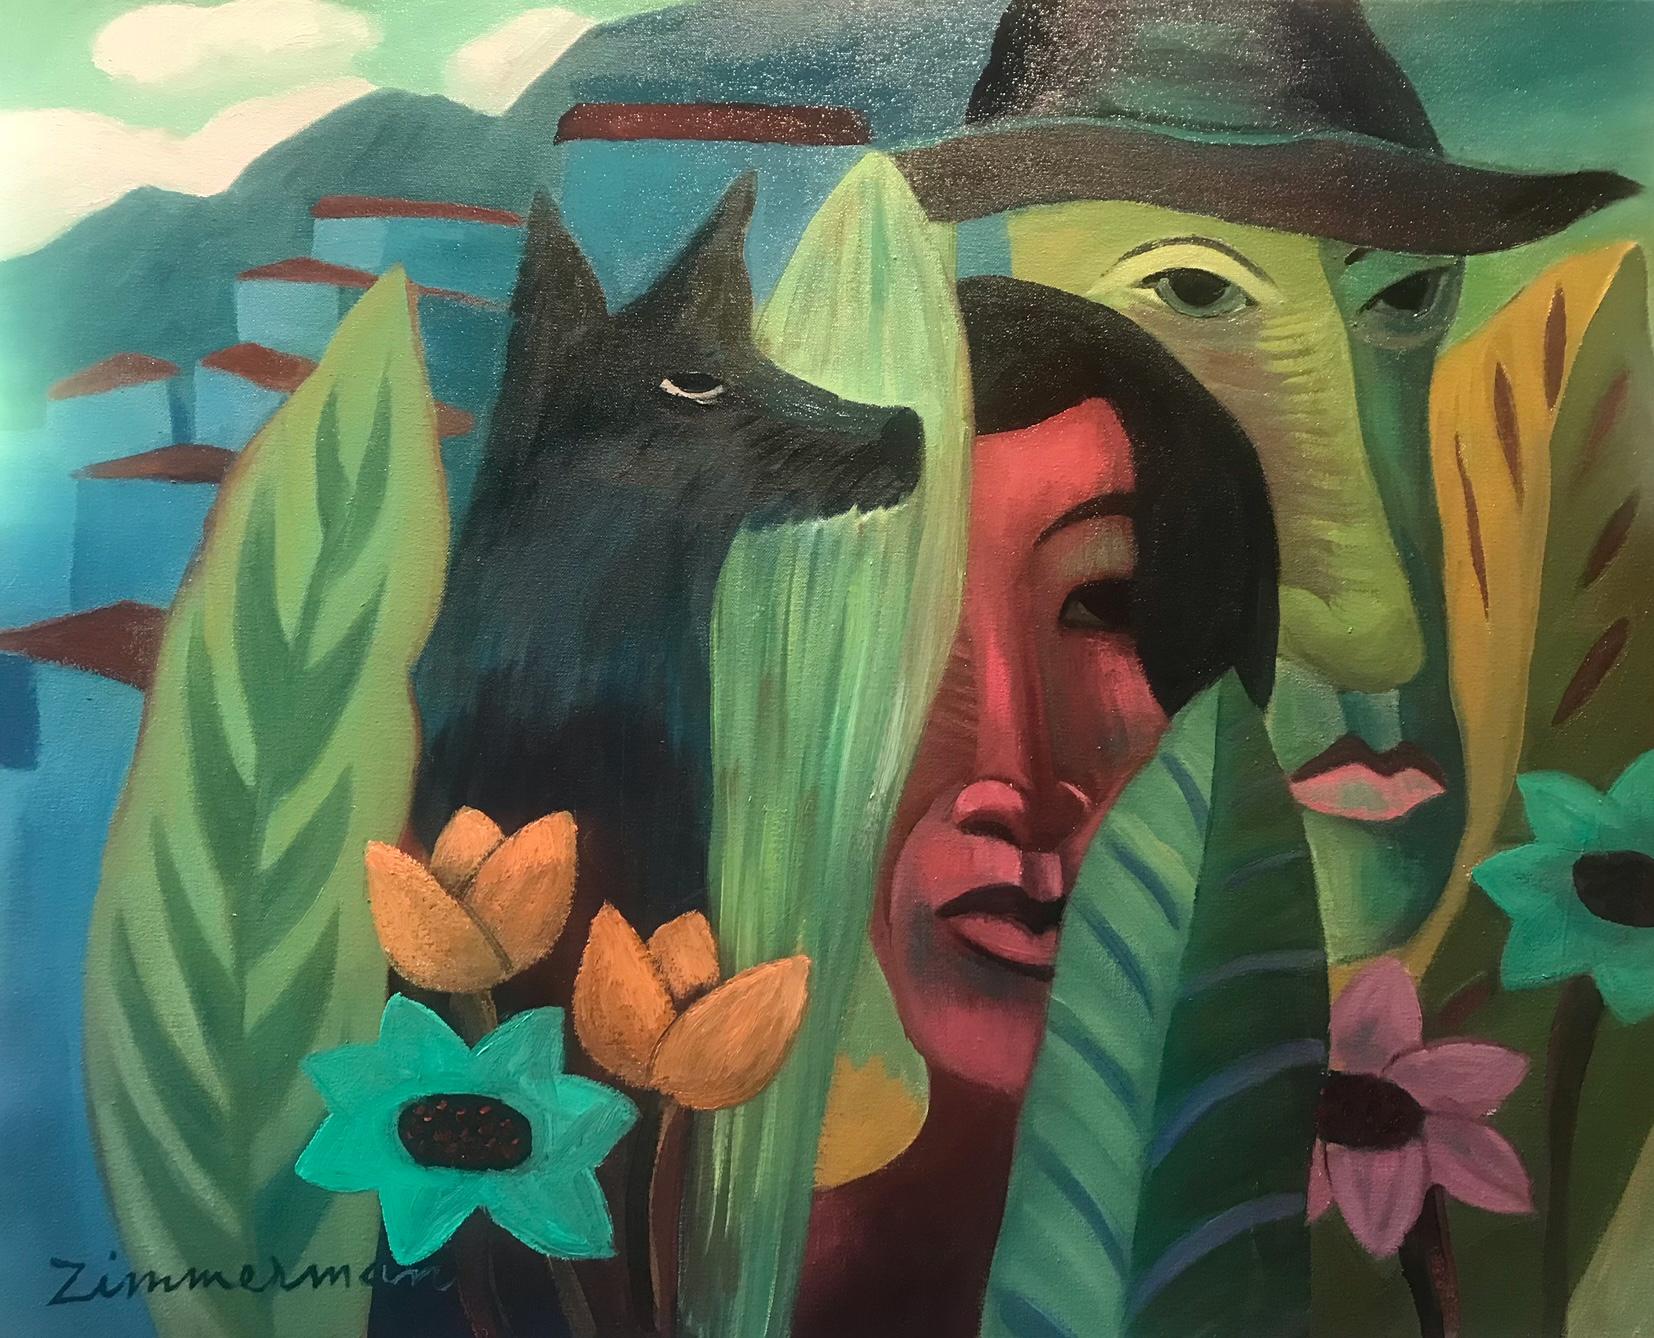 Howdi Do - by Marc Zimmerman - Figures Landscape Art
This masterpiece is exhibited in the Zimmerman Gallery, Carmel CA.

ABOUT THE ARTIST
Marc Zimmerman is a visionary artist whose creations embody a captivating blend of playfulness and depth. With